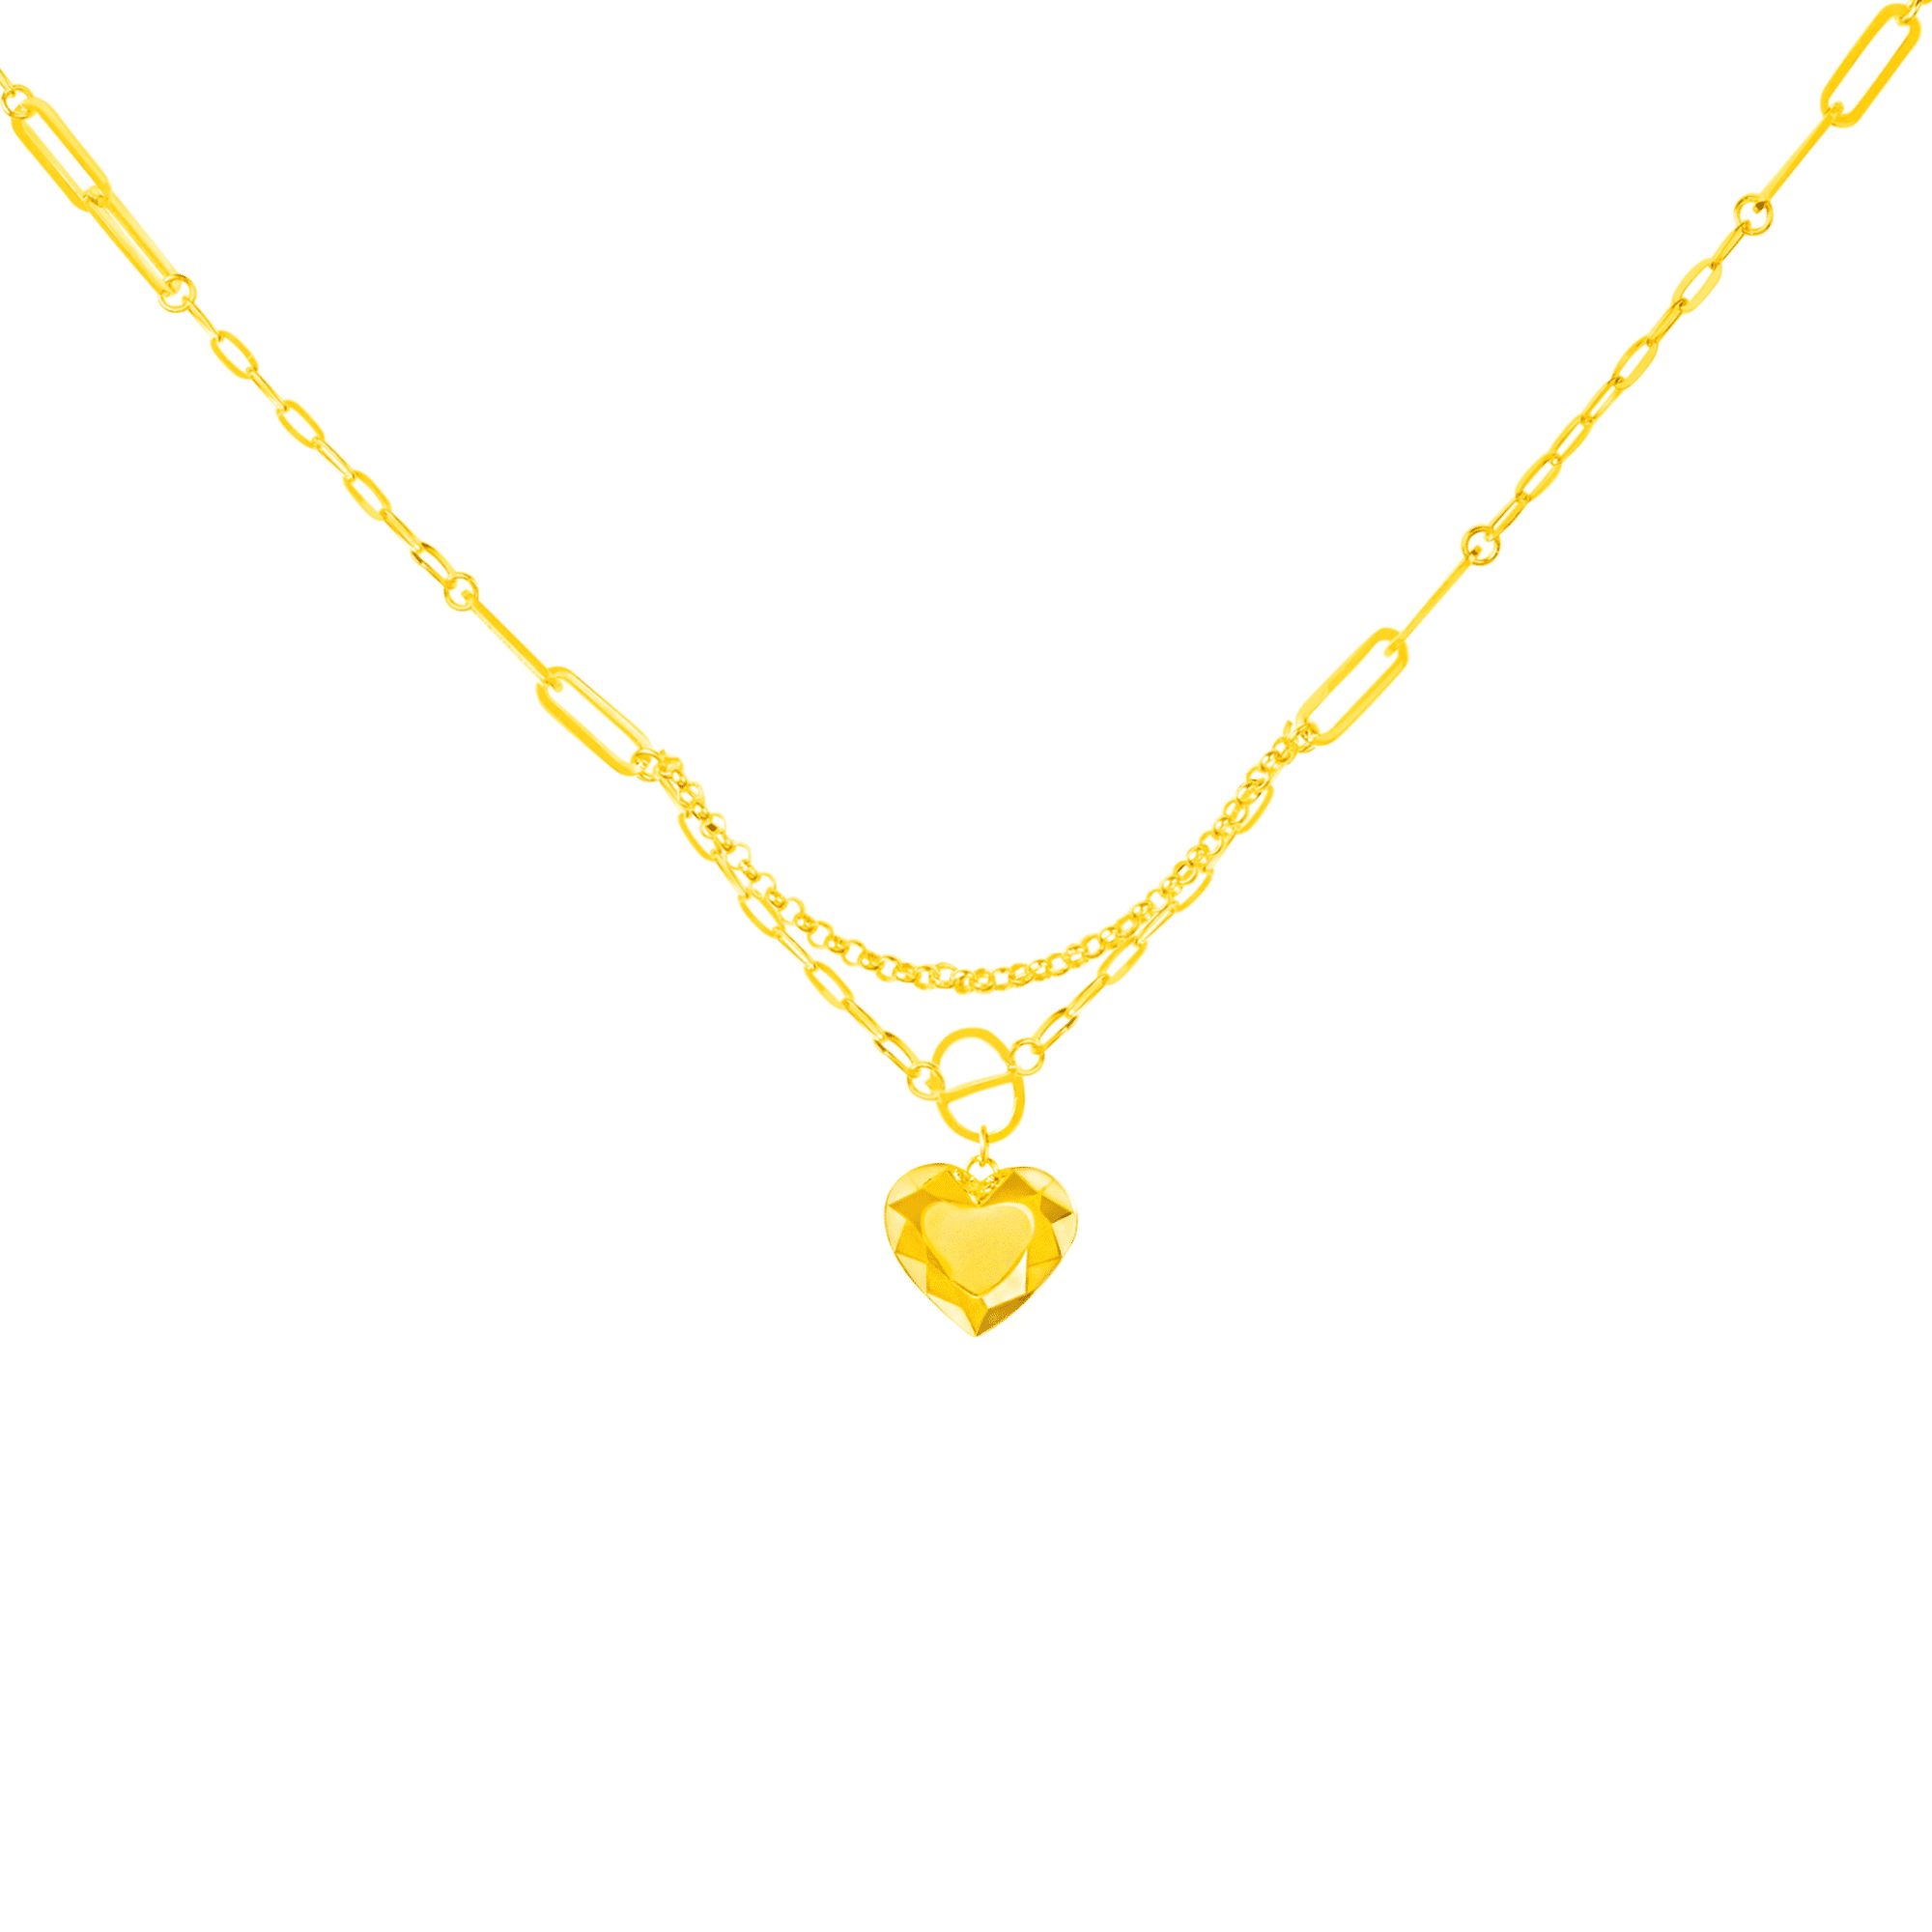 Faceted Hearts Necklace in 916 Gold